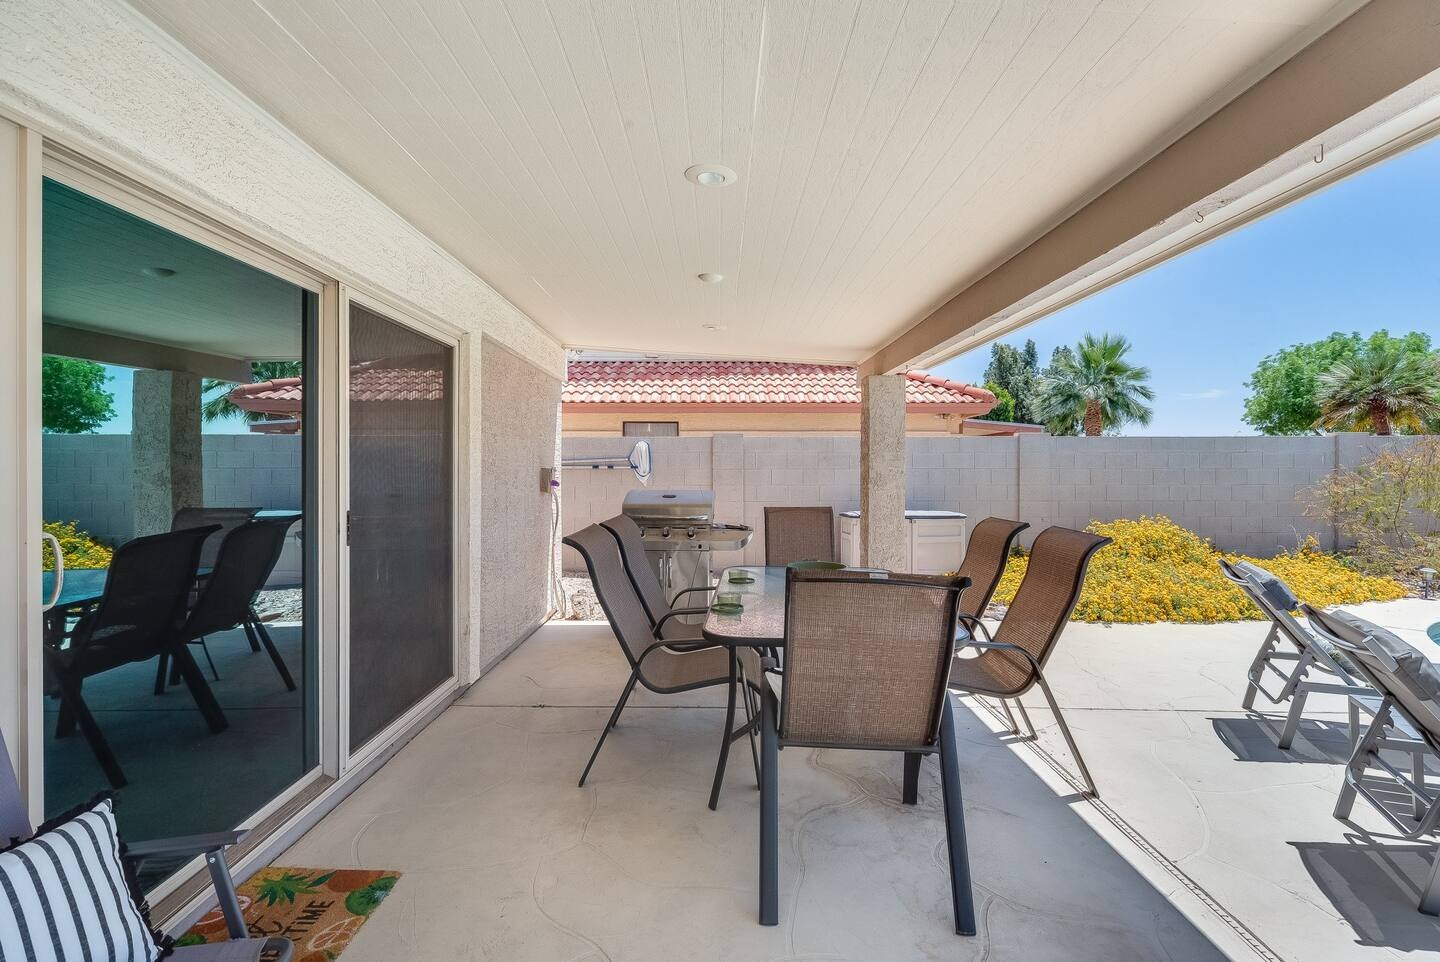 Glendale Vacation Rentals, Cahill Casa - Enjoy the fresh Arizona air under the backyard patio which covers a large outdoor dining table fit for 6 guests, as well as a barbecue grill station, perfect for cookout nights with the whole family.